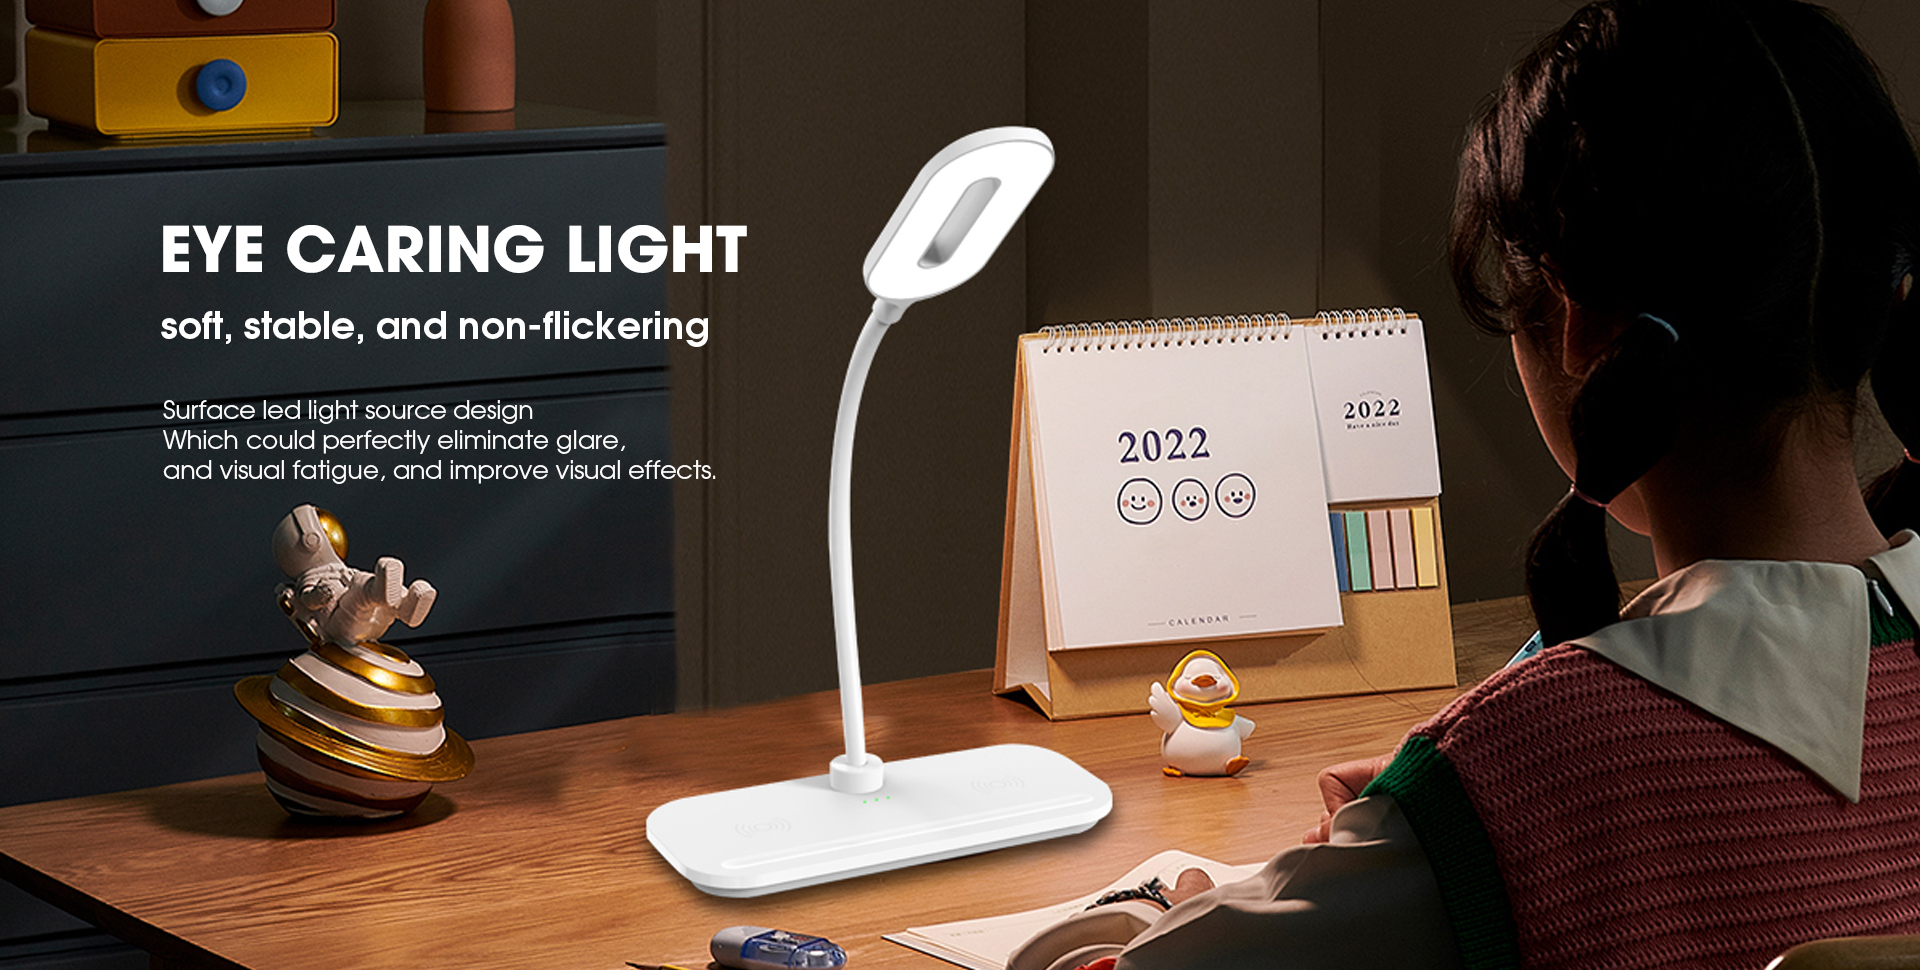 Eye caring light.soft,stable and non-flickering